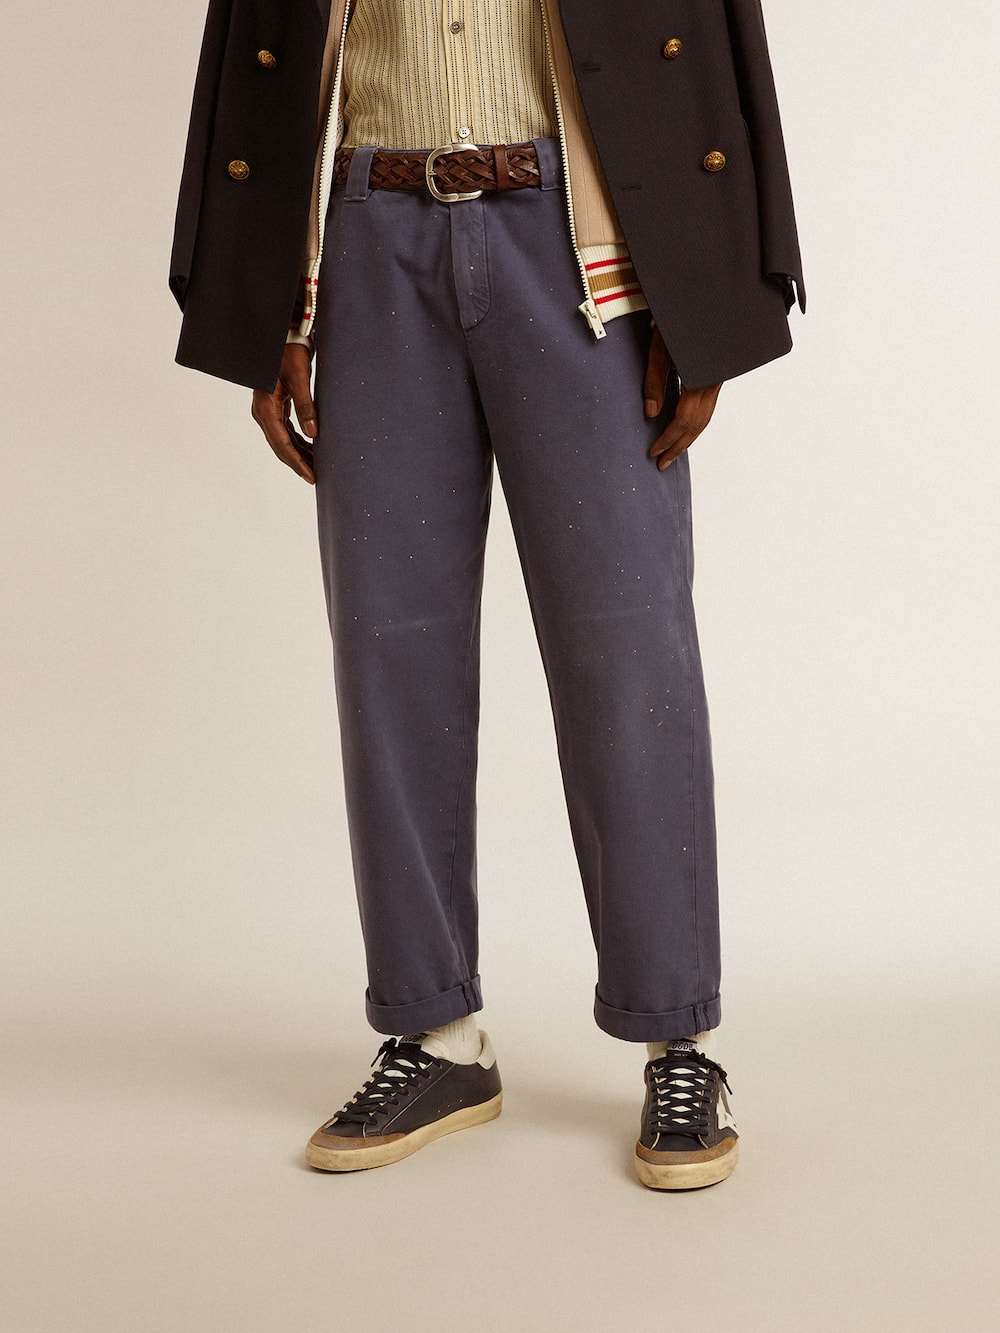 Golden Goose - Men's chinos in blue with a lived-in effect in 